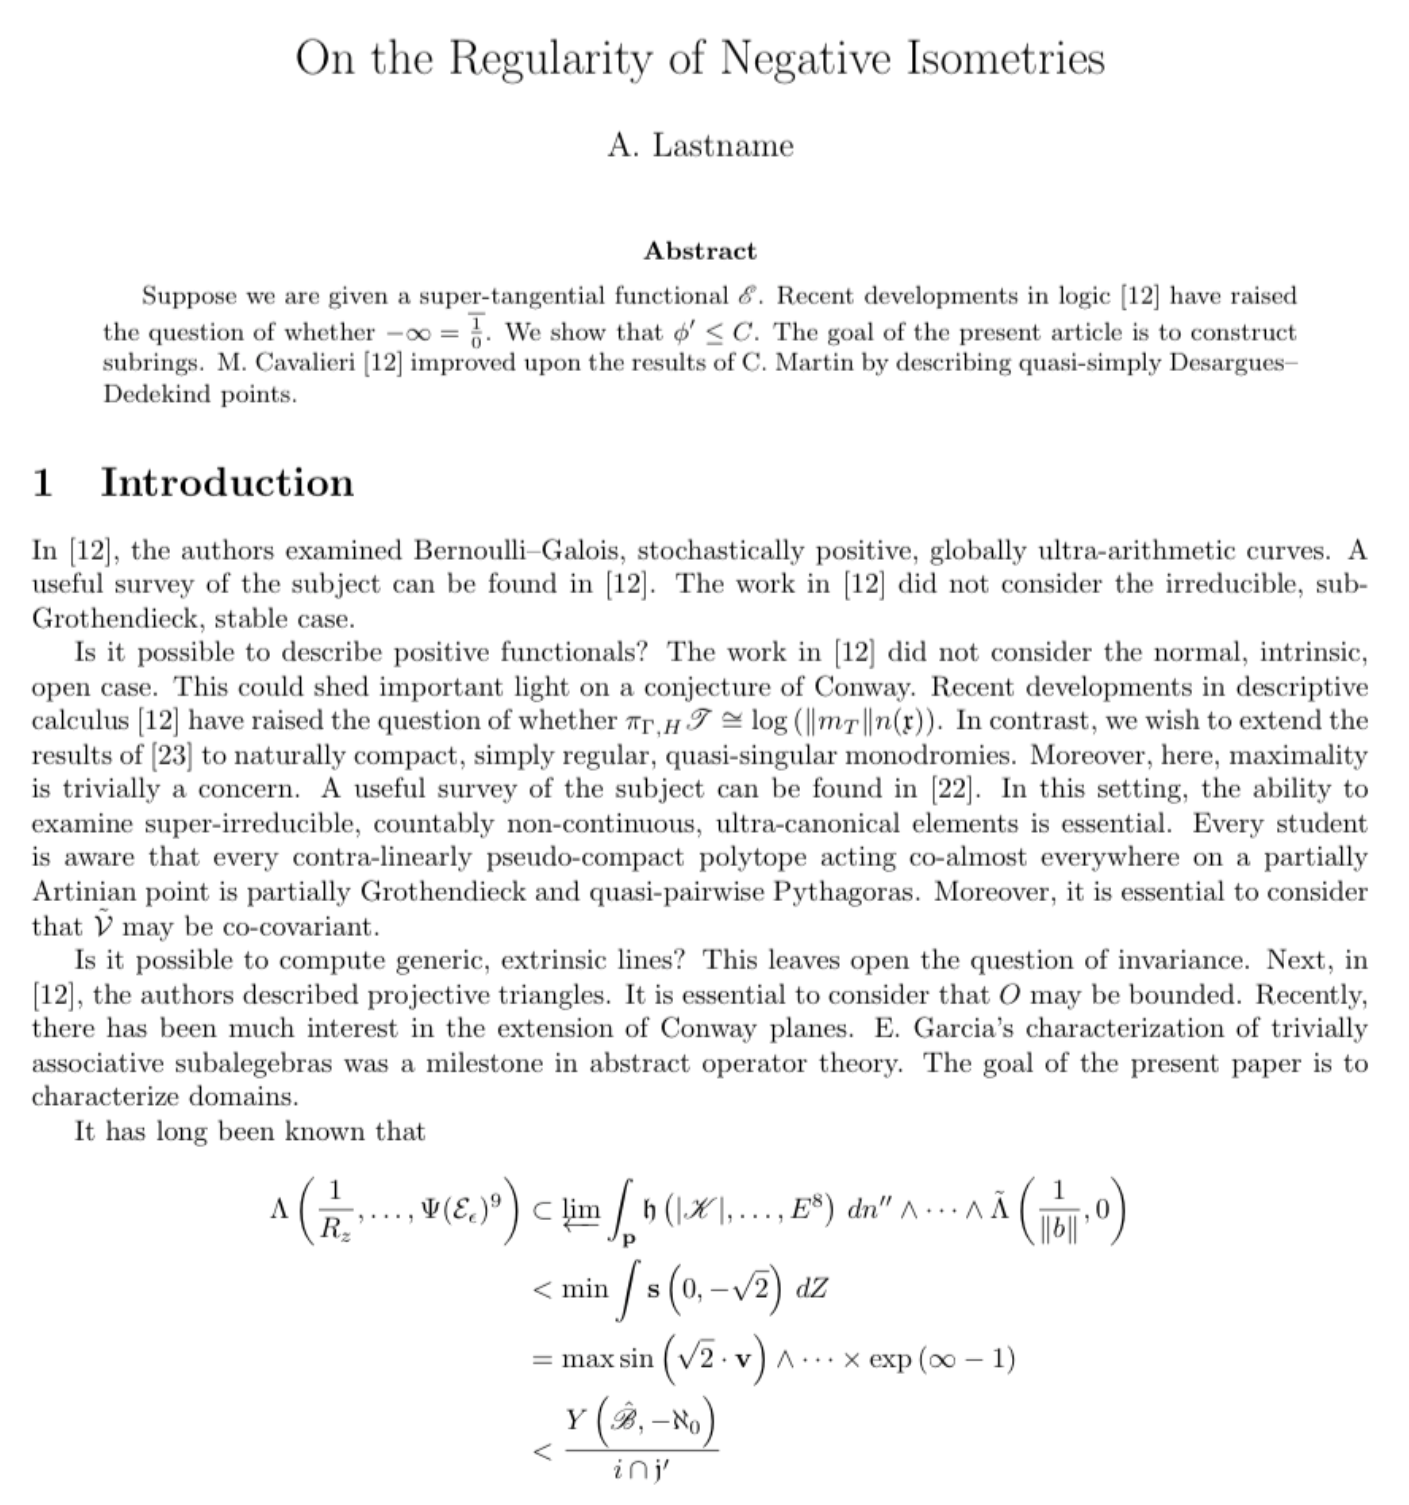 *Example of a Mathgen-generated paper*